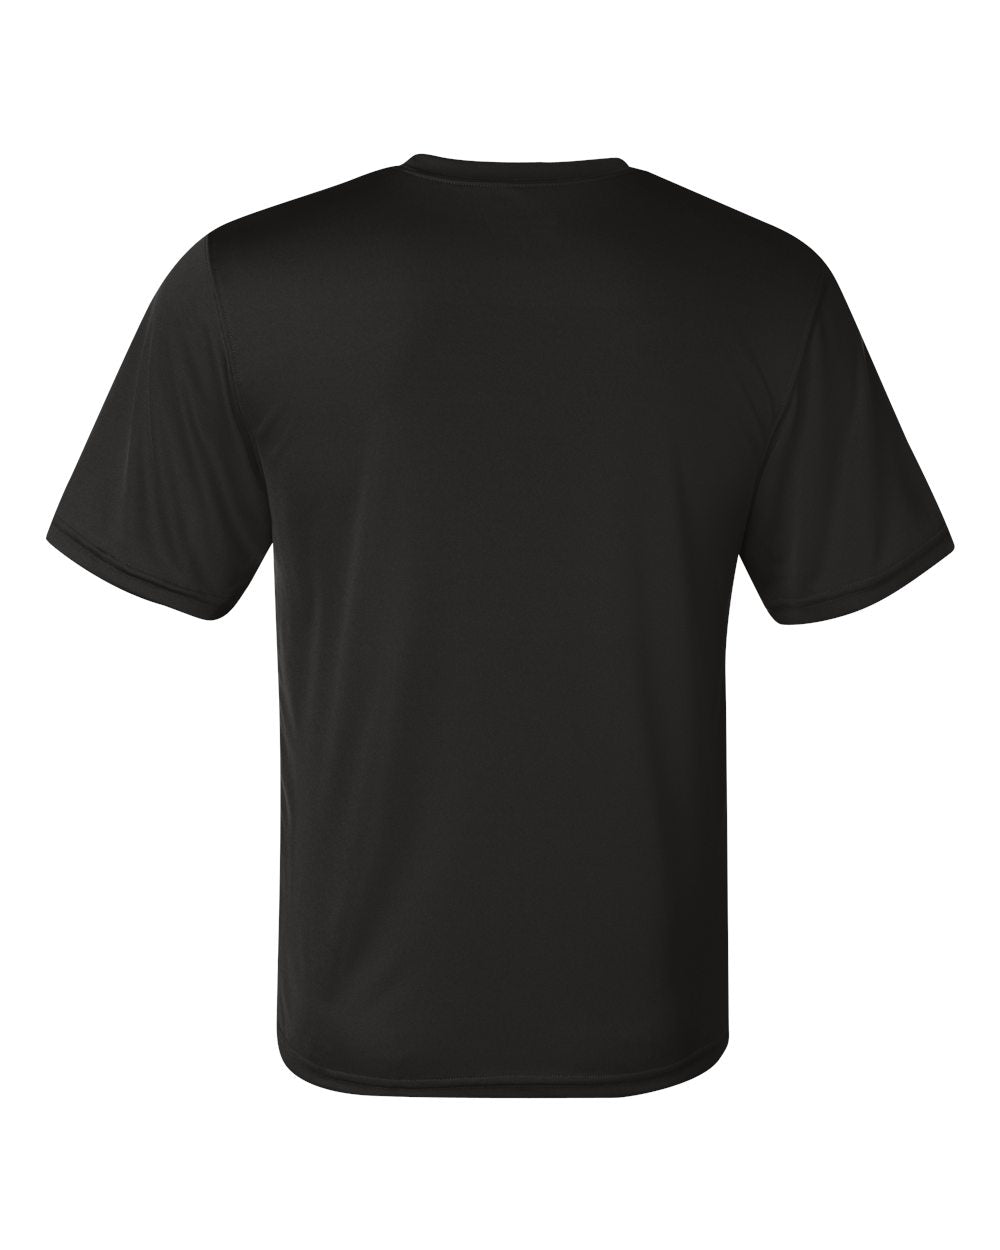 fully customizable polyester champion double dry performance tee shirt for your brand